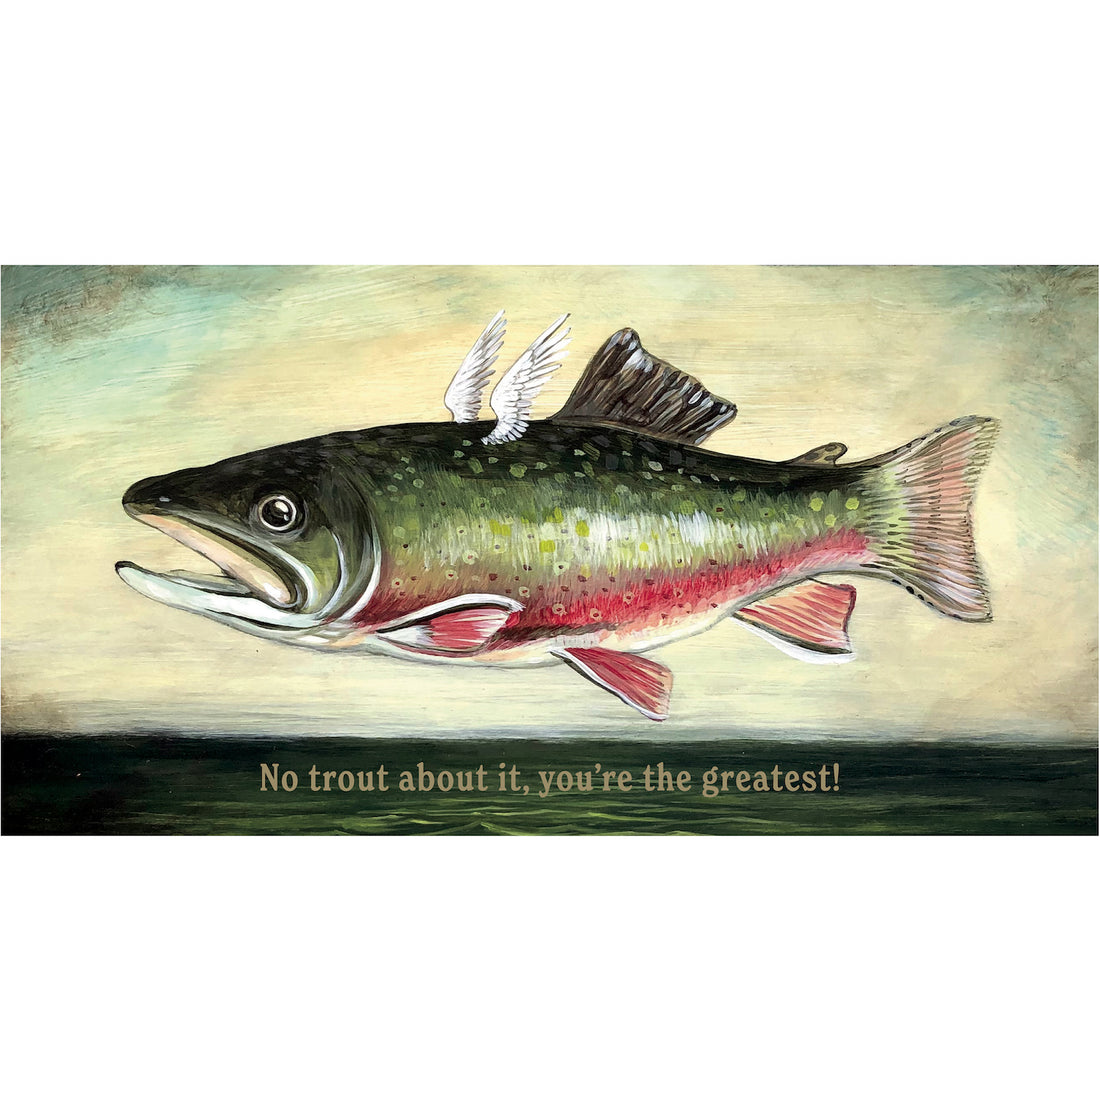 A whimsical illustration of a green, pink and white trout with small white wings flying above still dark waters, with the message &quot;No trout about it, you&